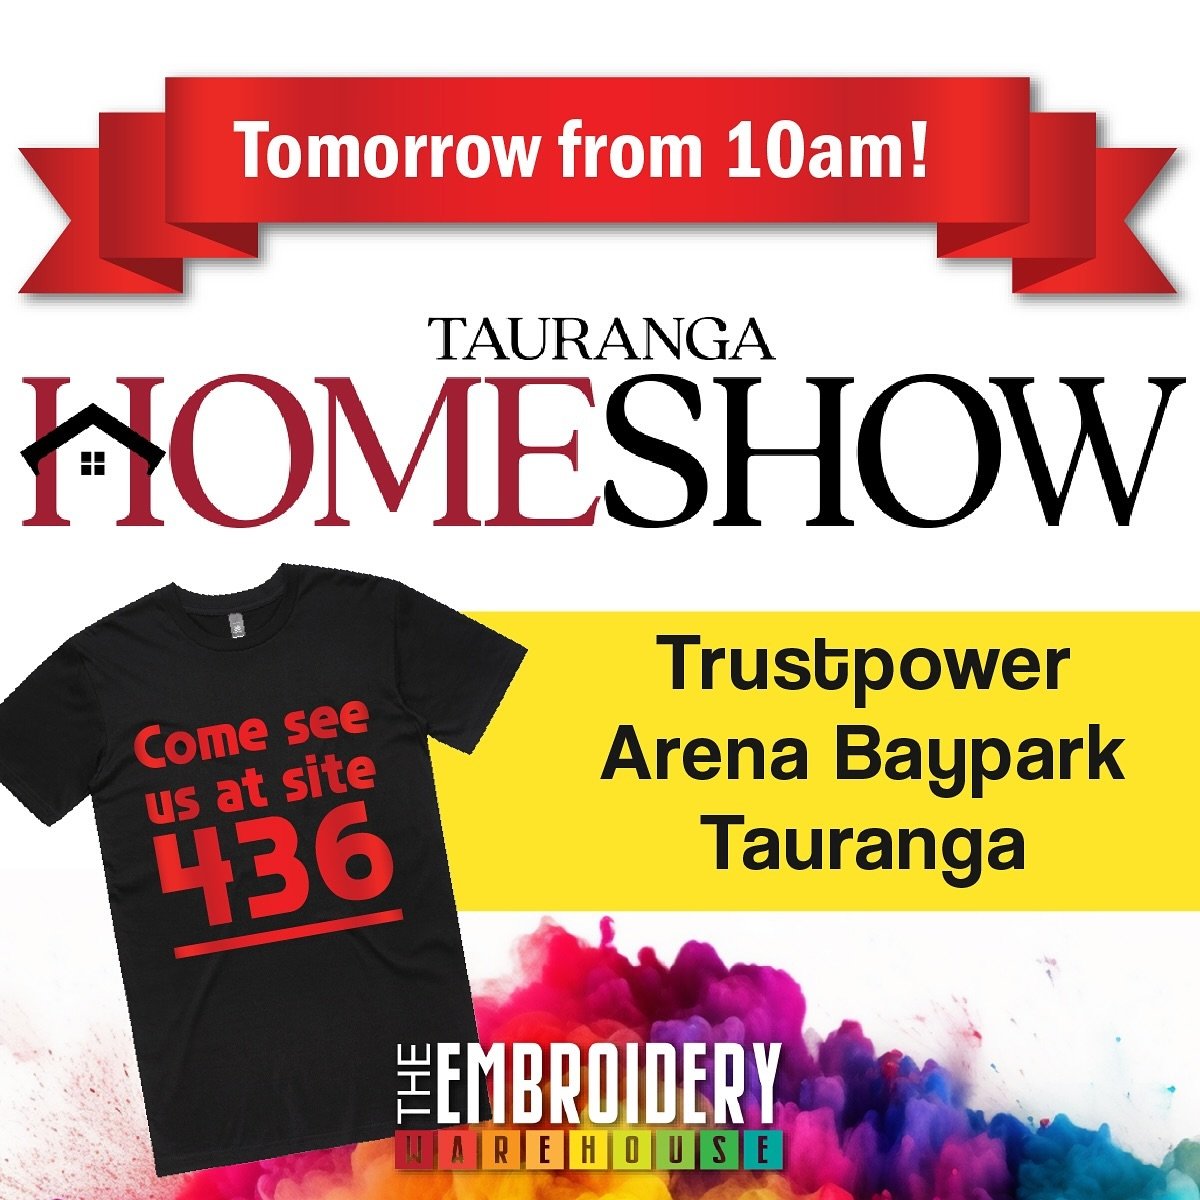 Come see us at the Home show! Will be there with bells on, giving out freebies and there mainly for the banter! Come on down and say hi, check out some stock and chat to us about your next uniform ideas. 

#taurnagahomeshow #tauranga #homeshow #baypa